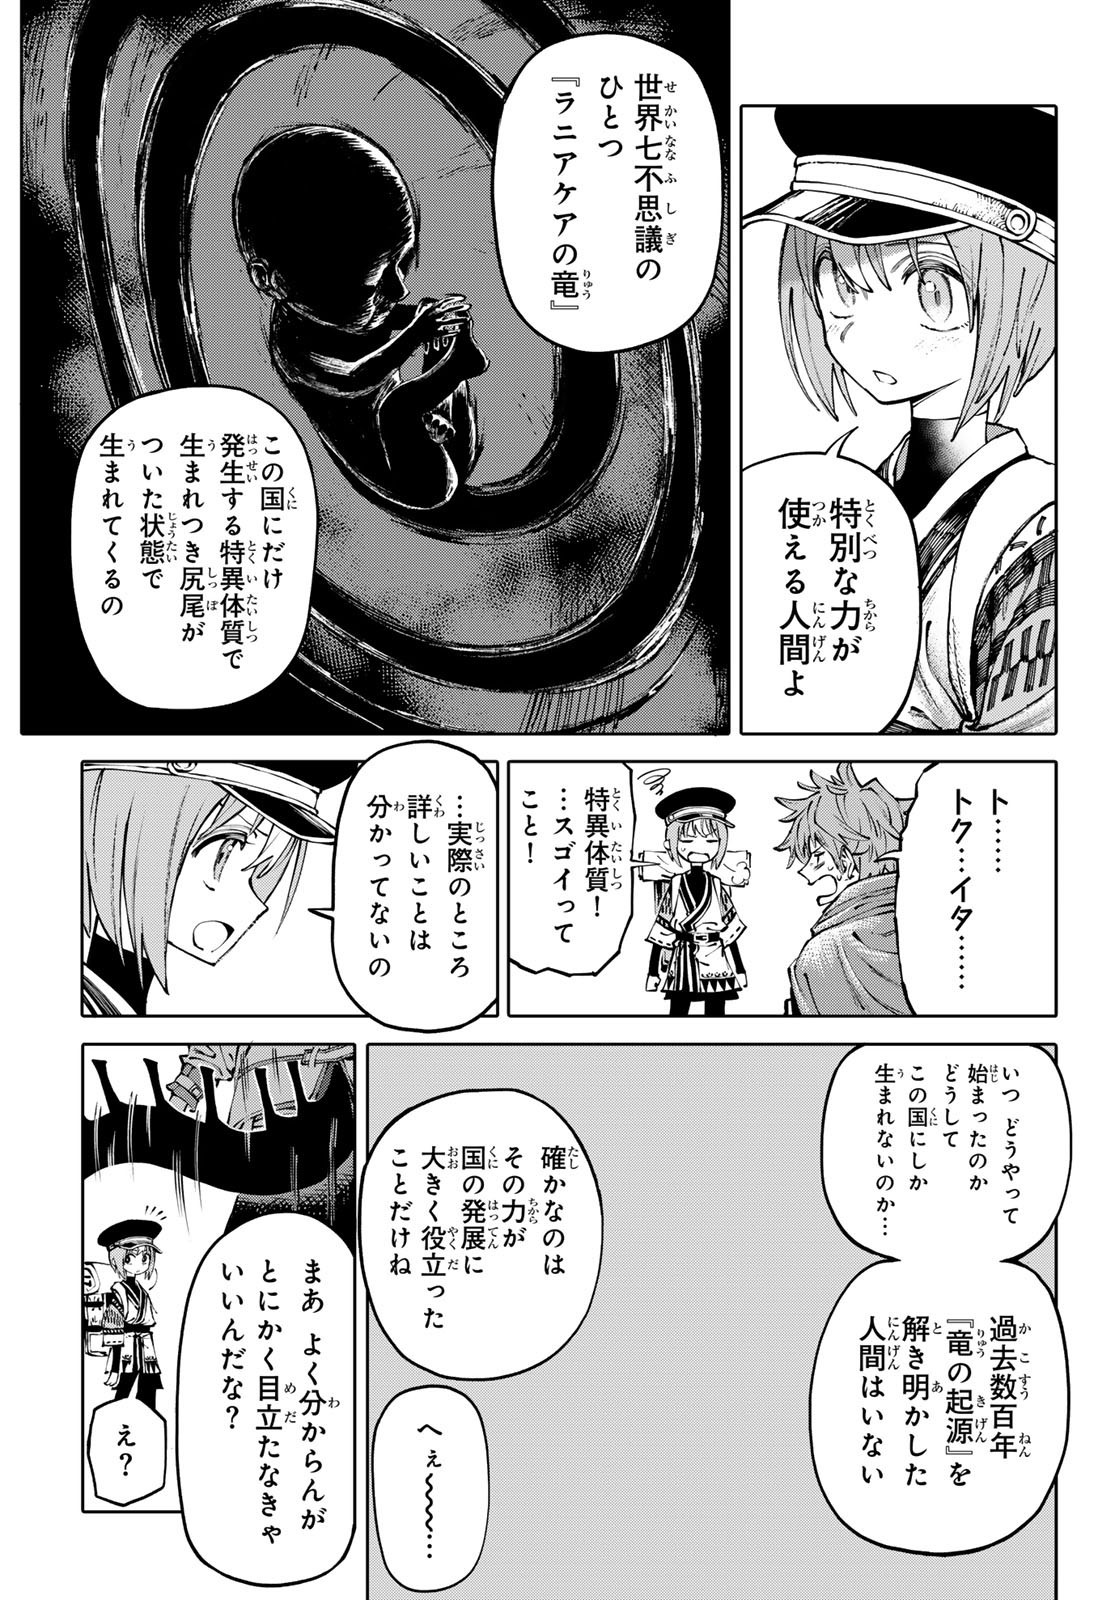 Weekly Shōnen Magazine - 週刊少年マガジン - Chapter 2024-34 - Page 40